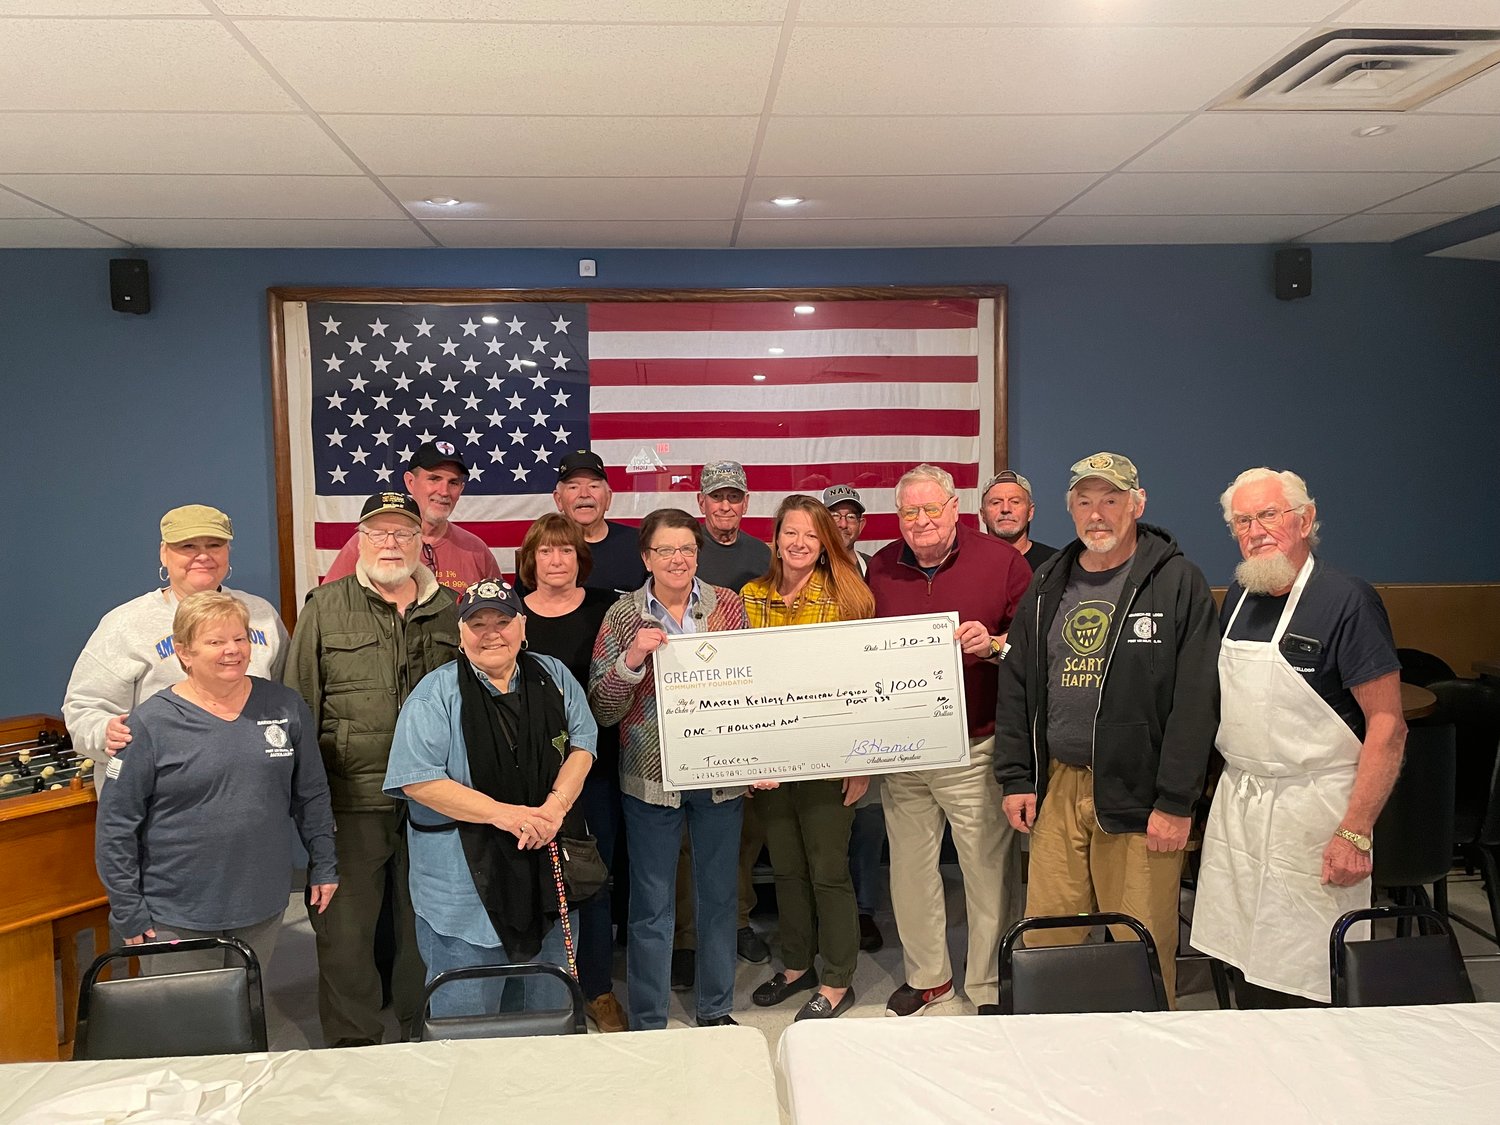 Cornelia (Connie) Harvey, Commander of American Legion Post 139, center, receives $1,000 from Greater Pike Community Foundation to purchase turkeys for the Legion’s holiday event. Foundation Board member Maryann Monte and Board Chair Jim Pedranti, presented the grant.